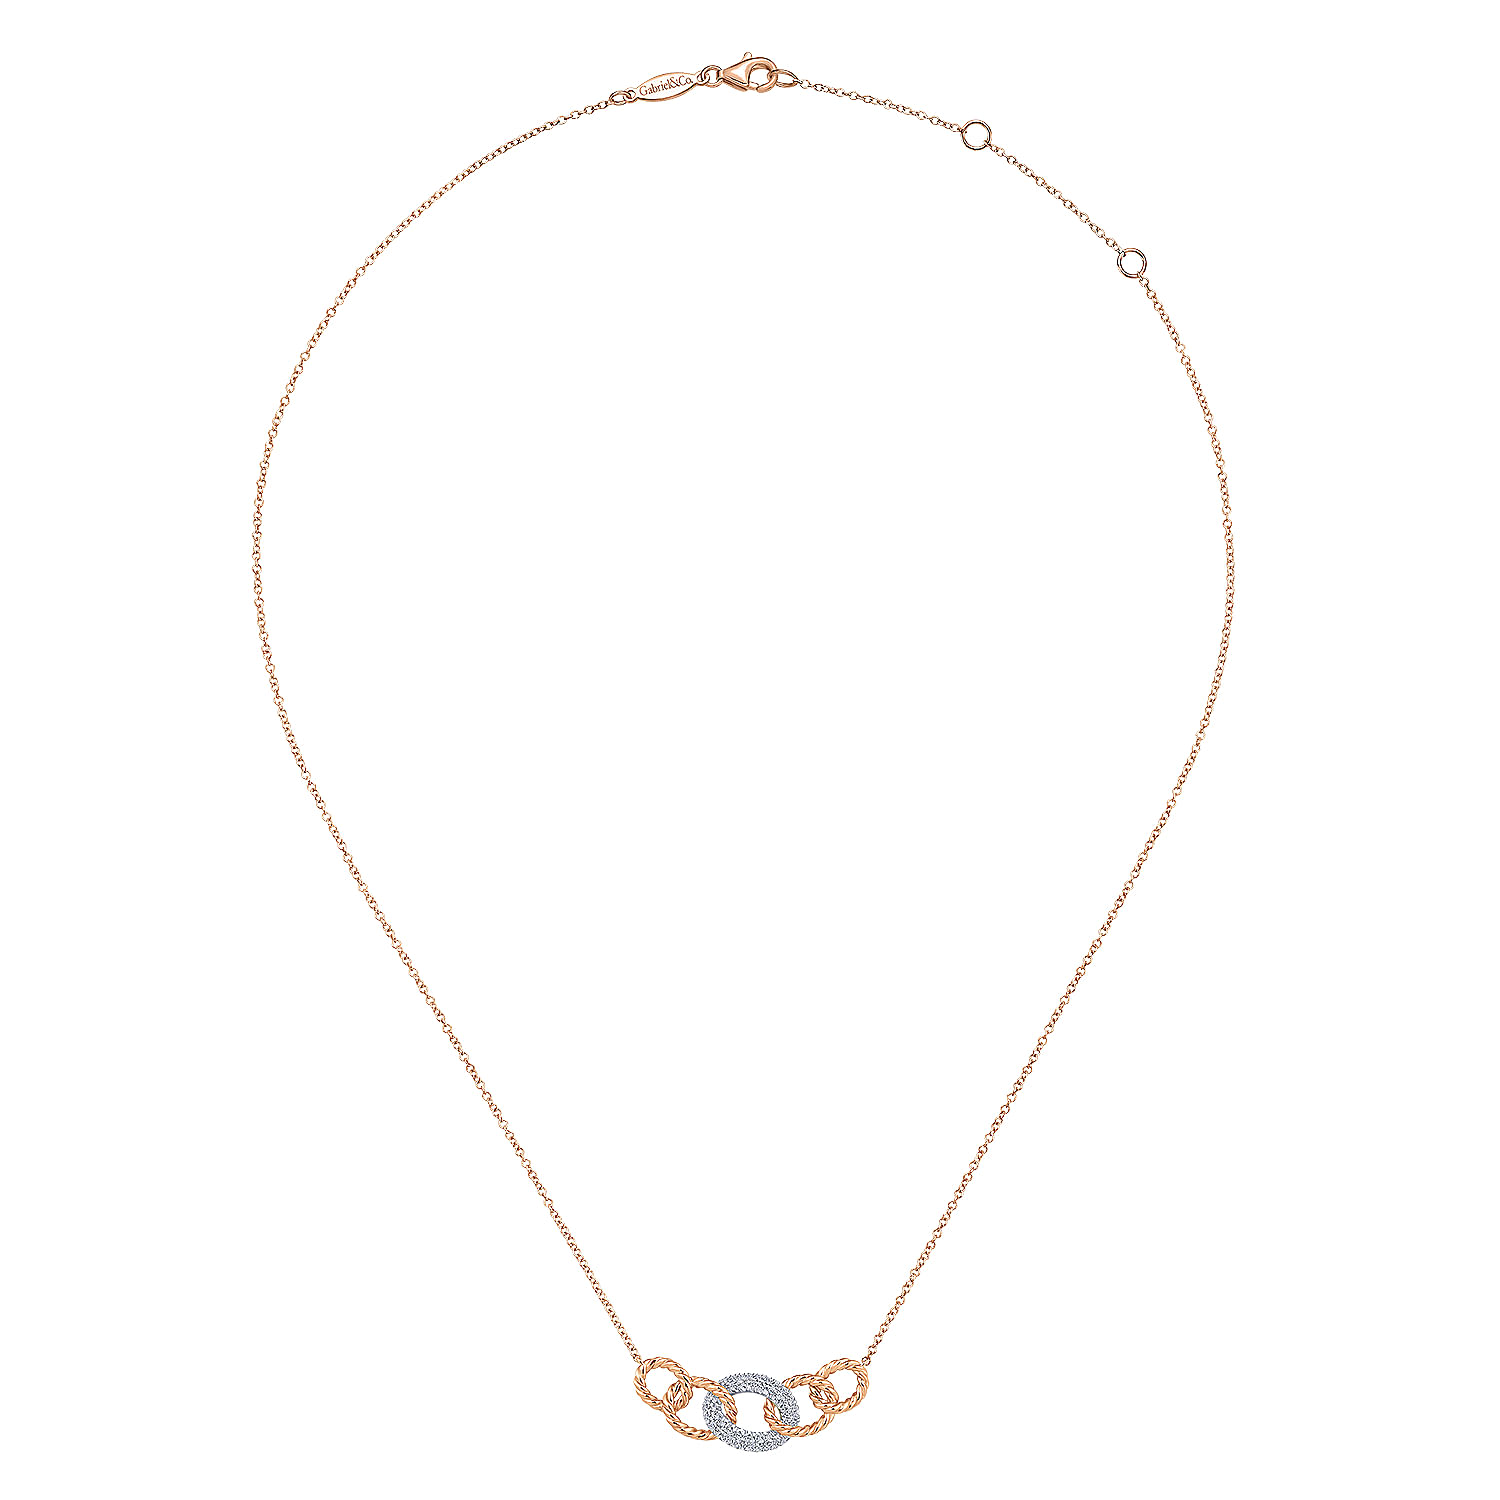 14K Rose-White Gold Twisted Rope Link Necklace with Pavé Diamond Link Station